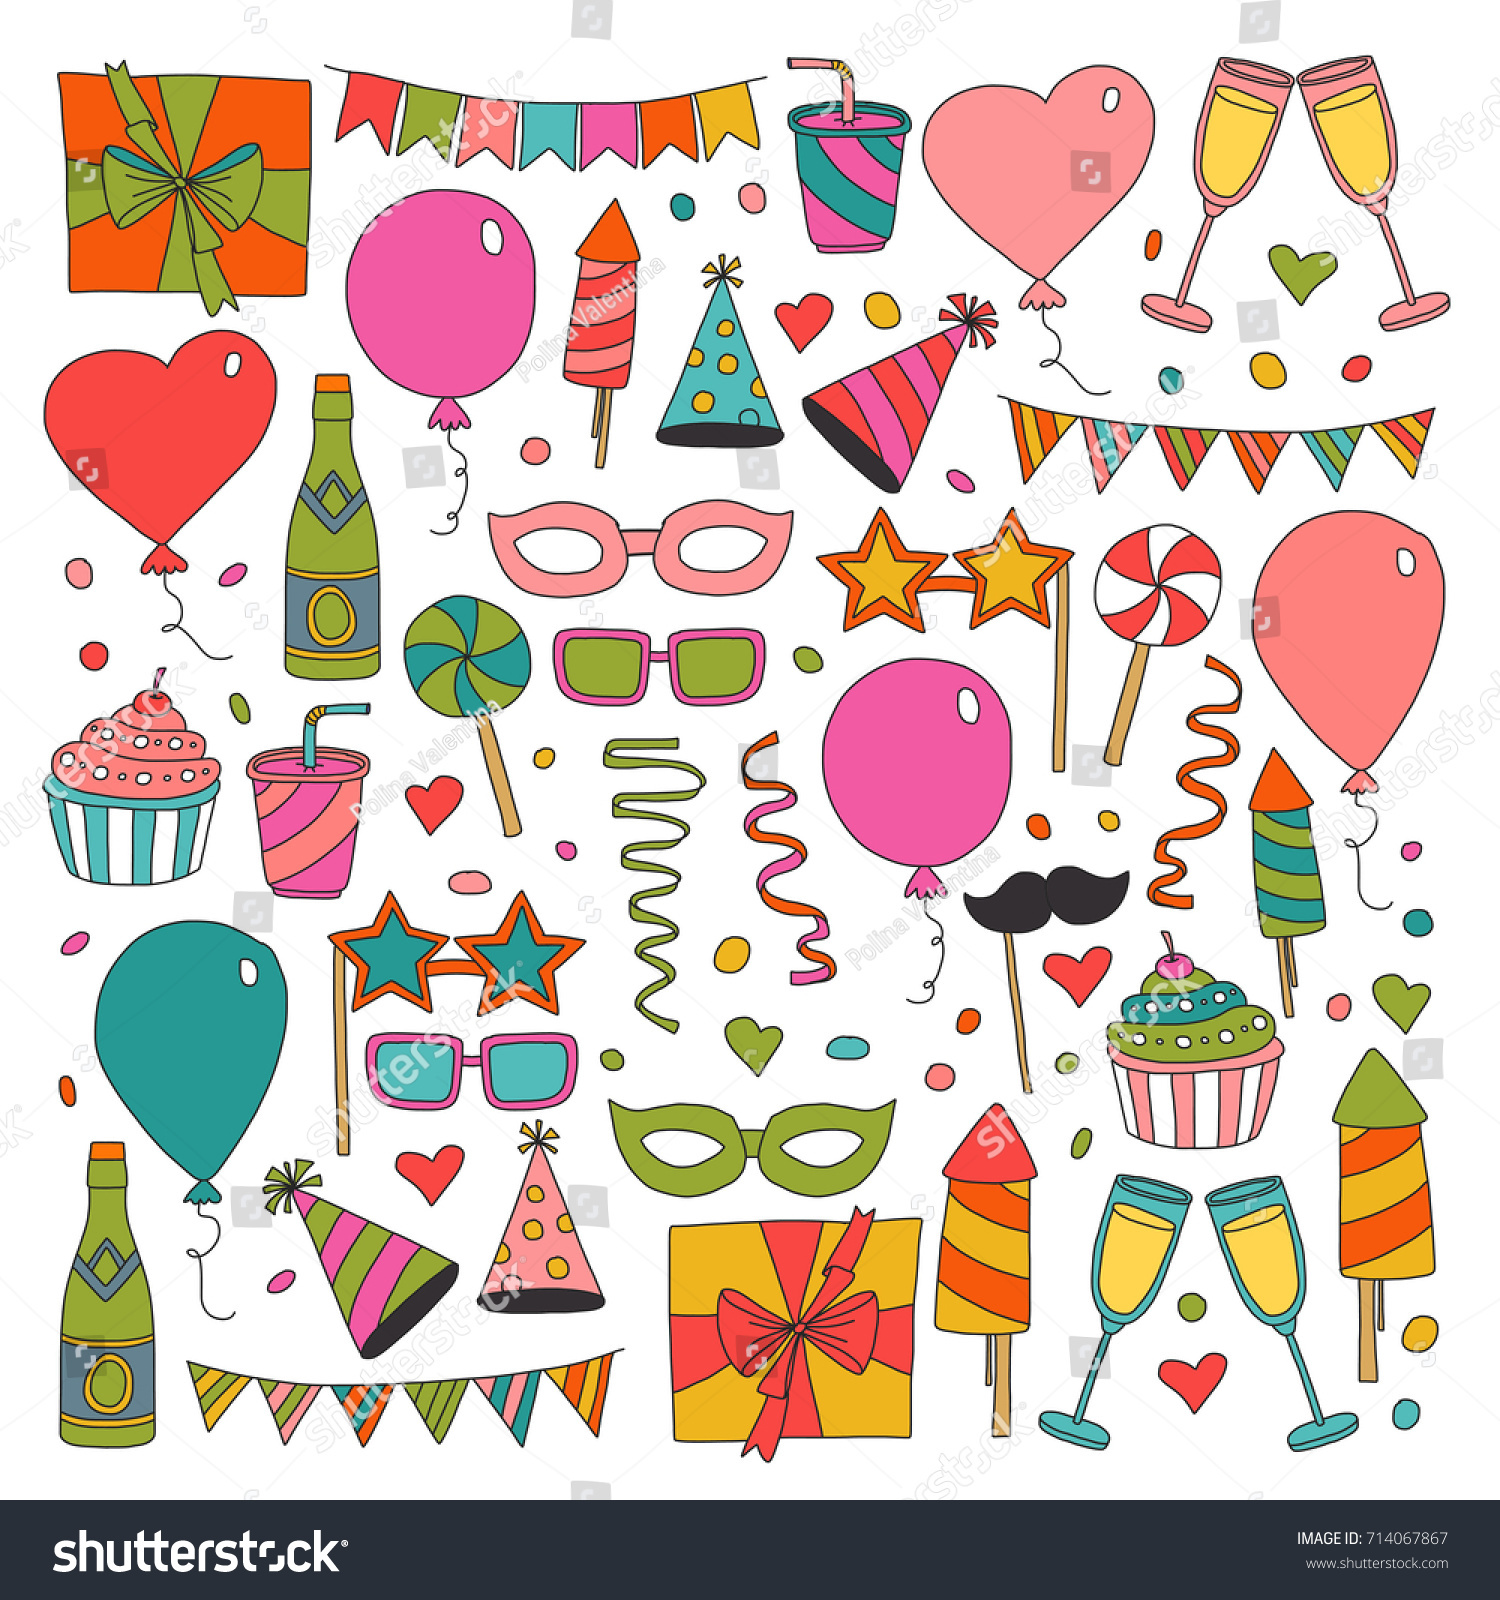 Kids Birthday Card Template from image.shutterstock.com